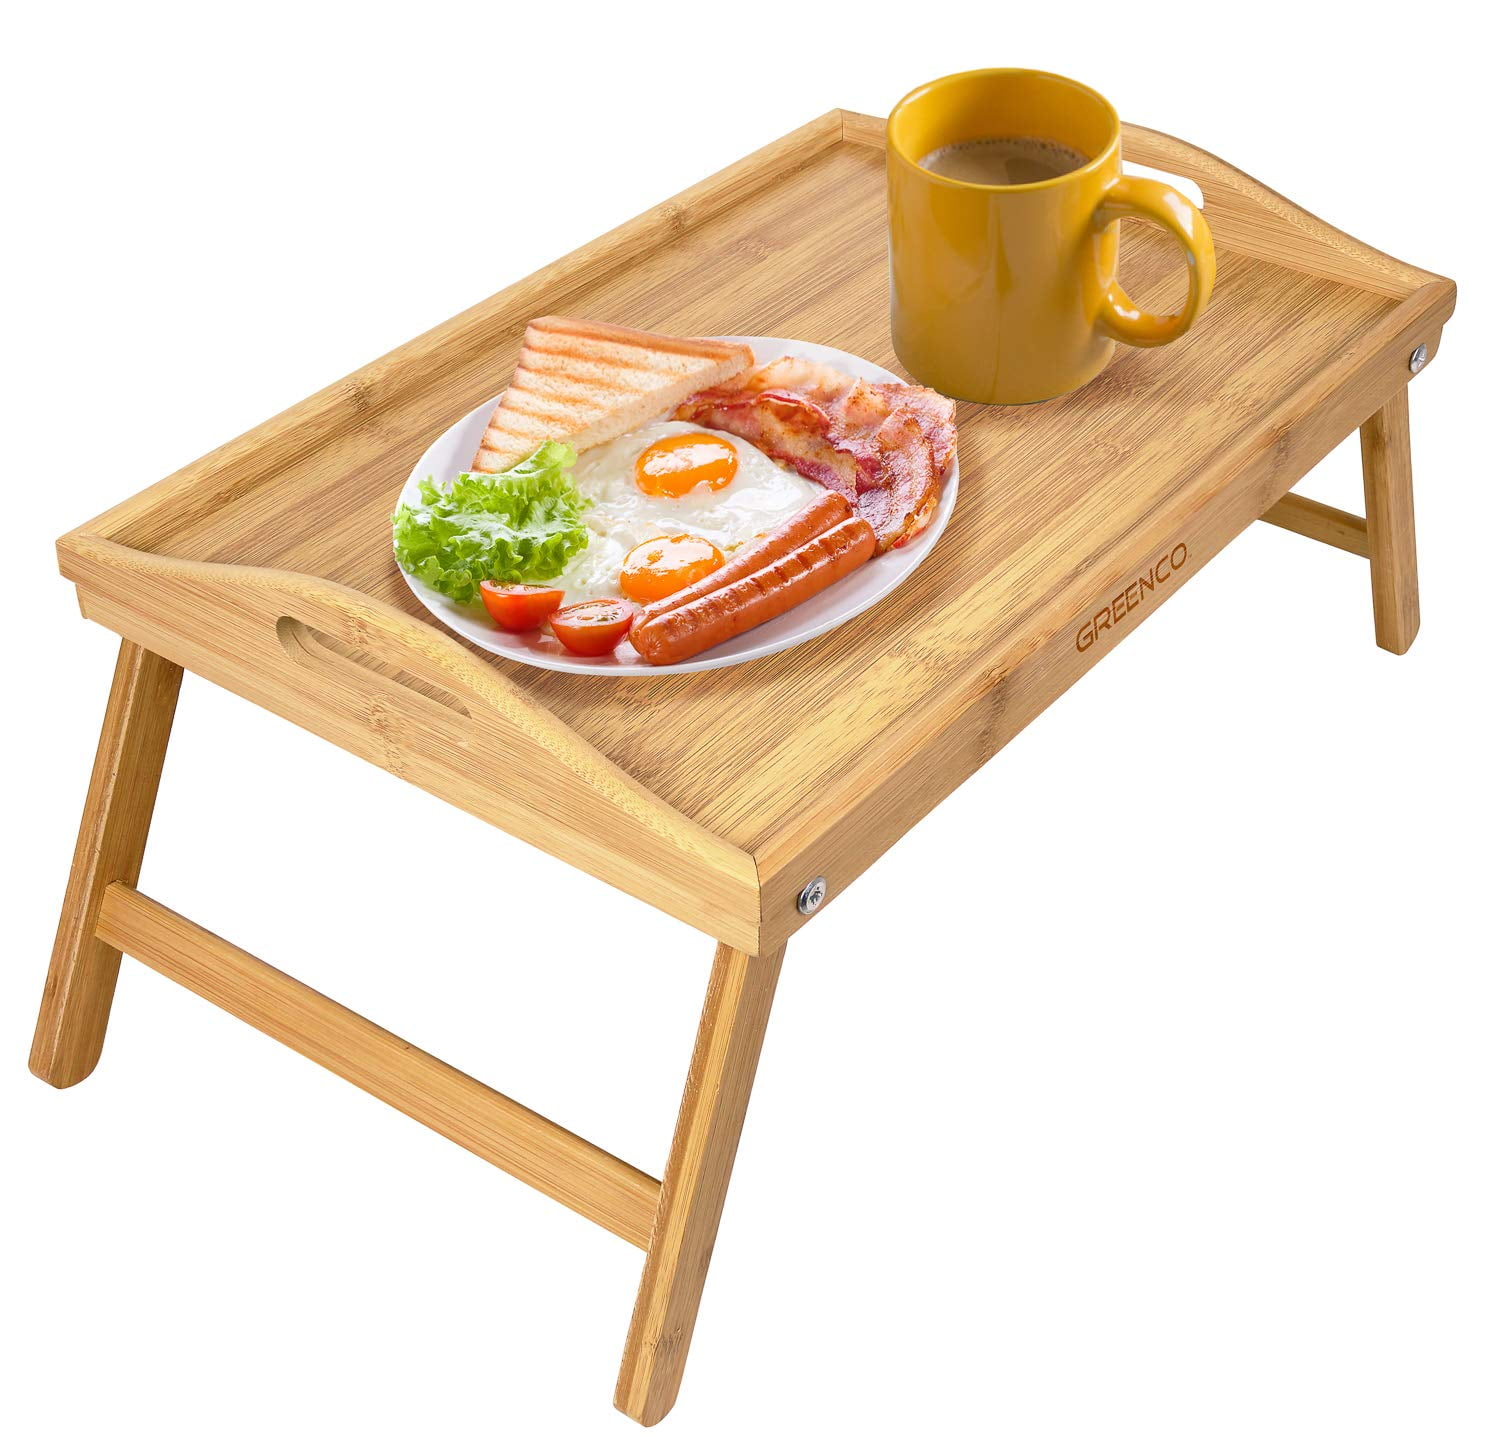 Bed Eating Working Pipishell Bamboo Bed Tray Table with Foldable Legs Used As Laptop Desk Snack Tray Breakfast Tray for Sofa 